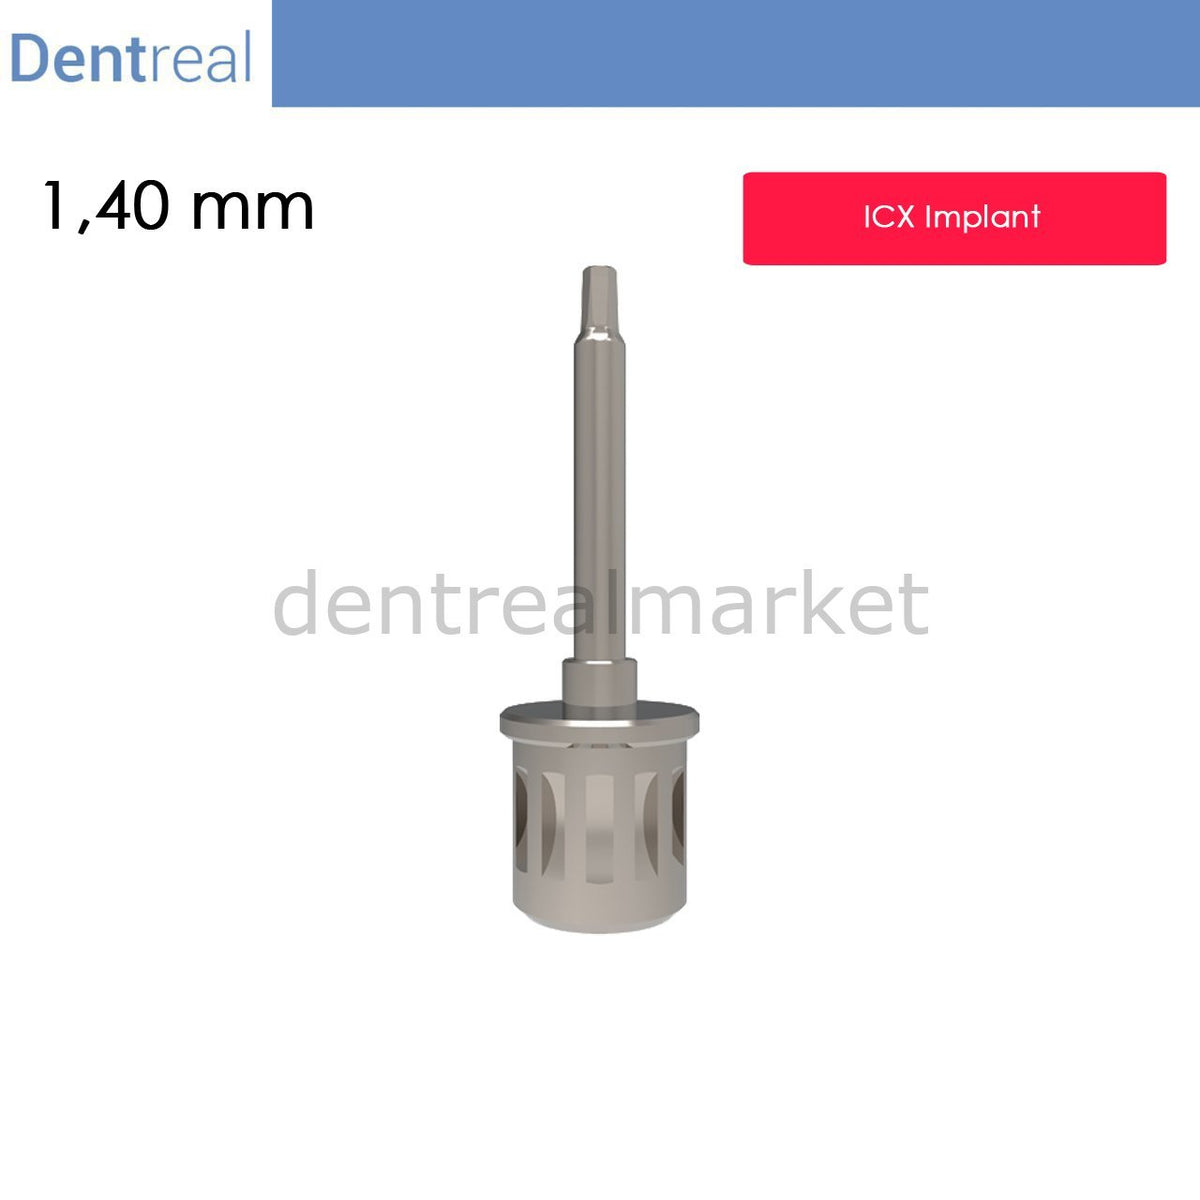 DentrealStore - Dentreal Screwdriver for ICX implant - 1,40 mm Hex Driver